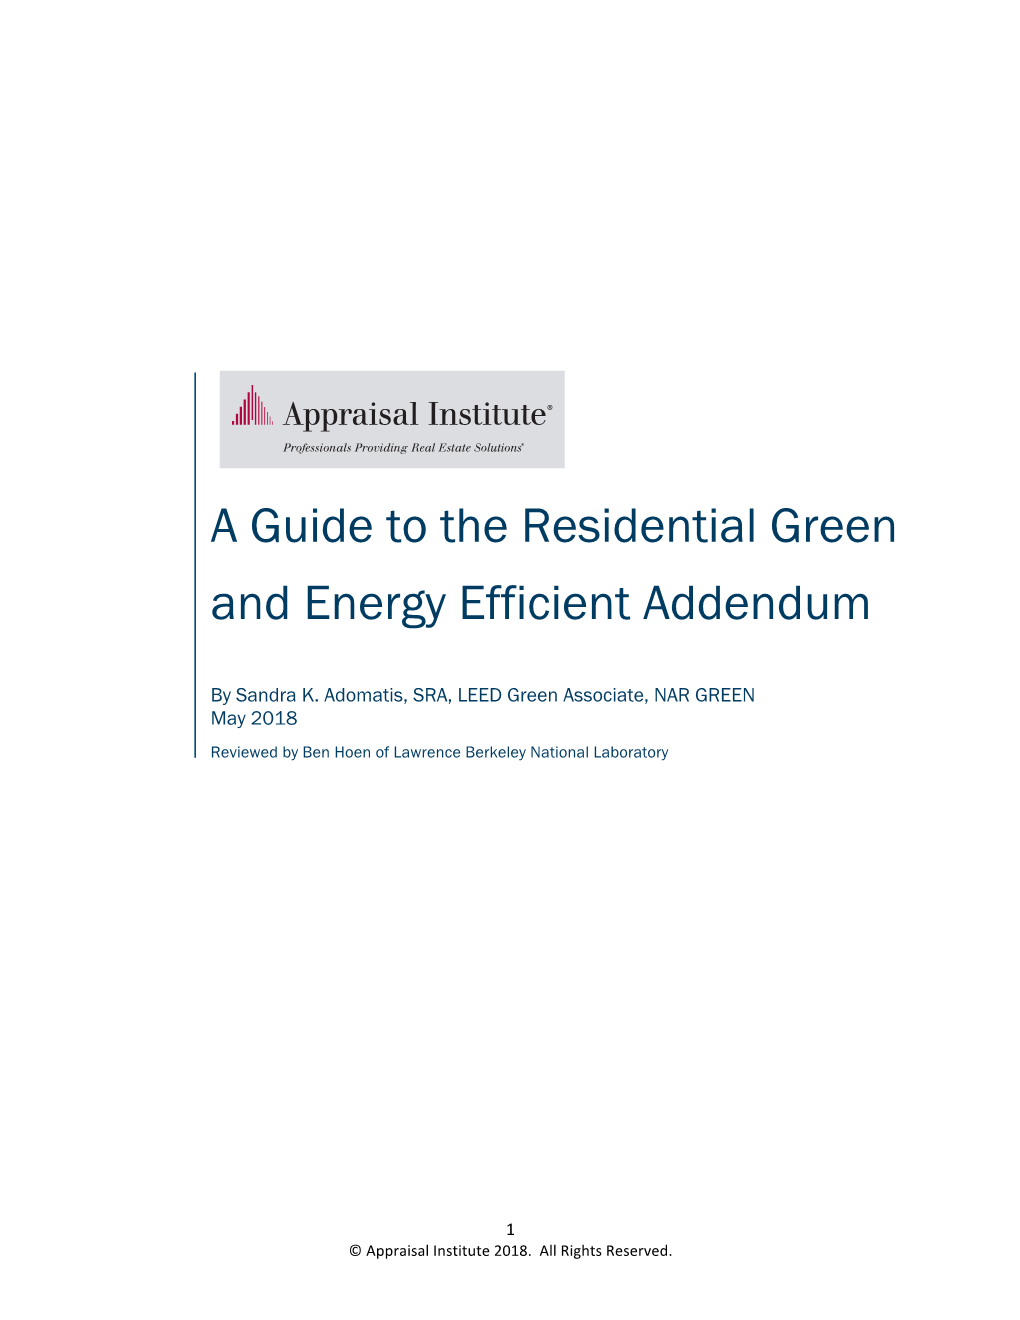 A Guide to the Residential Green and Energy Efficient Addendum